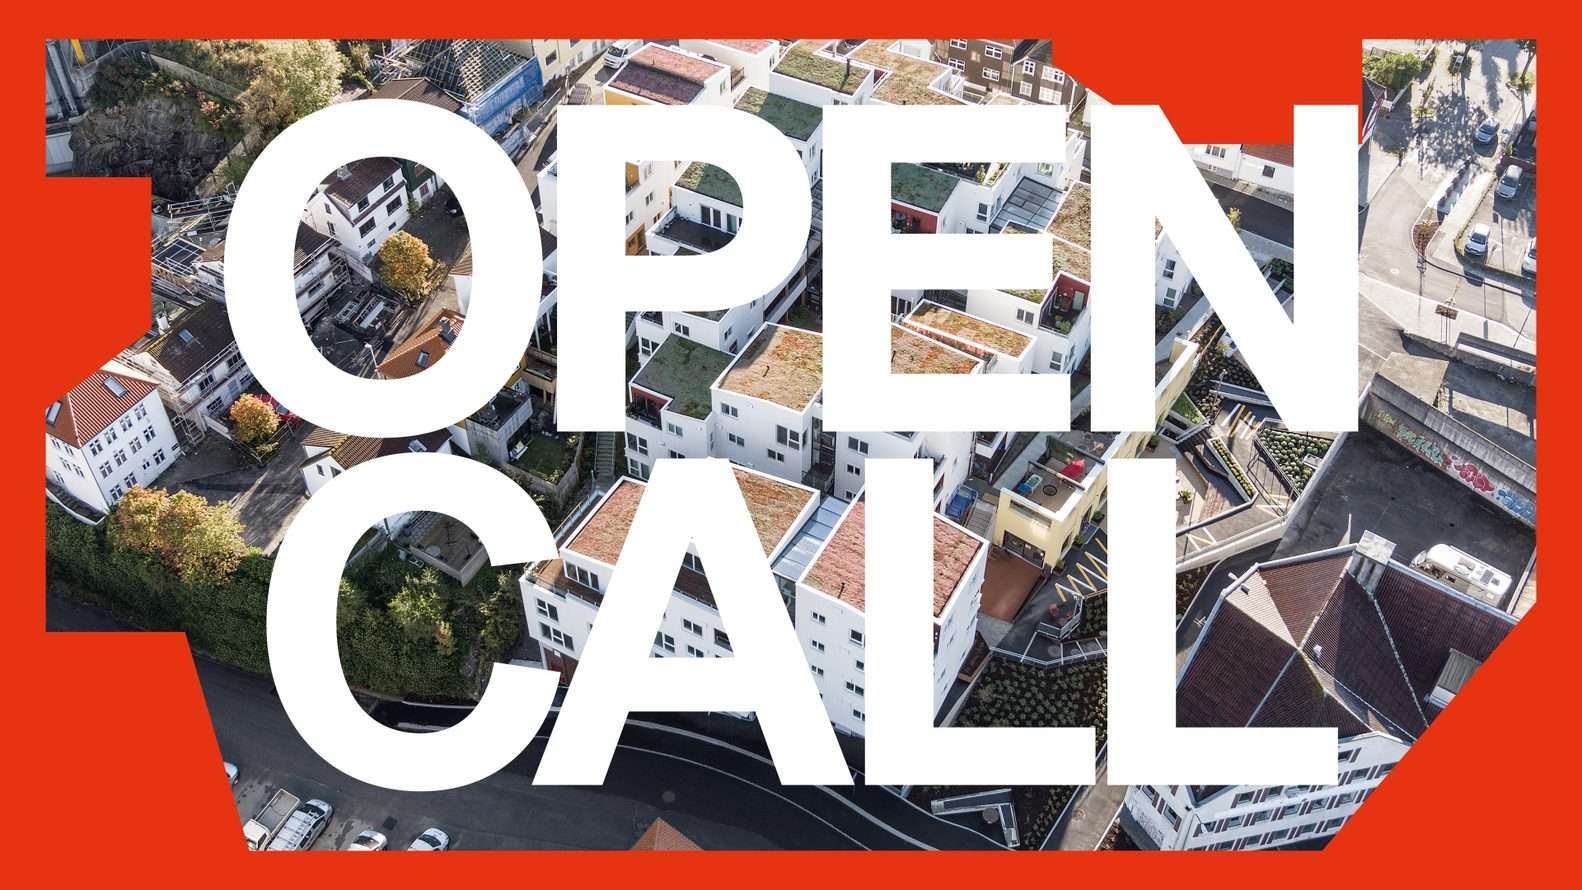 Oslo Architecture Triennale Open Call: Mission Neighbourhood—(Re)forming Communities